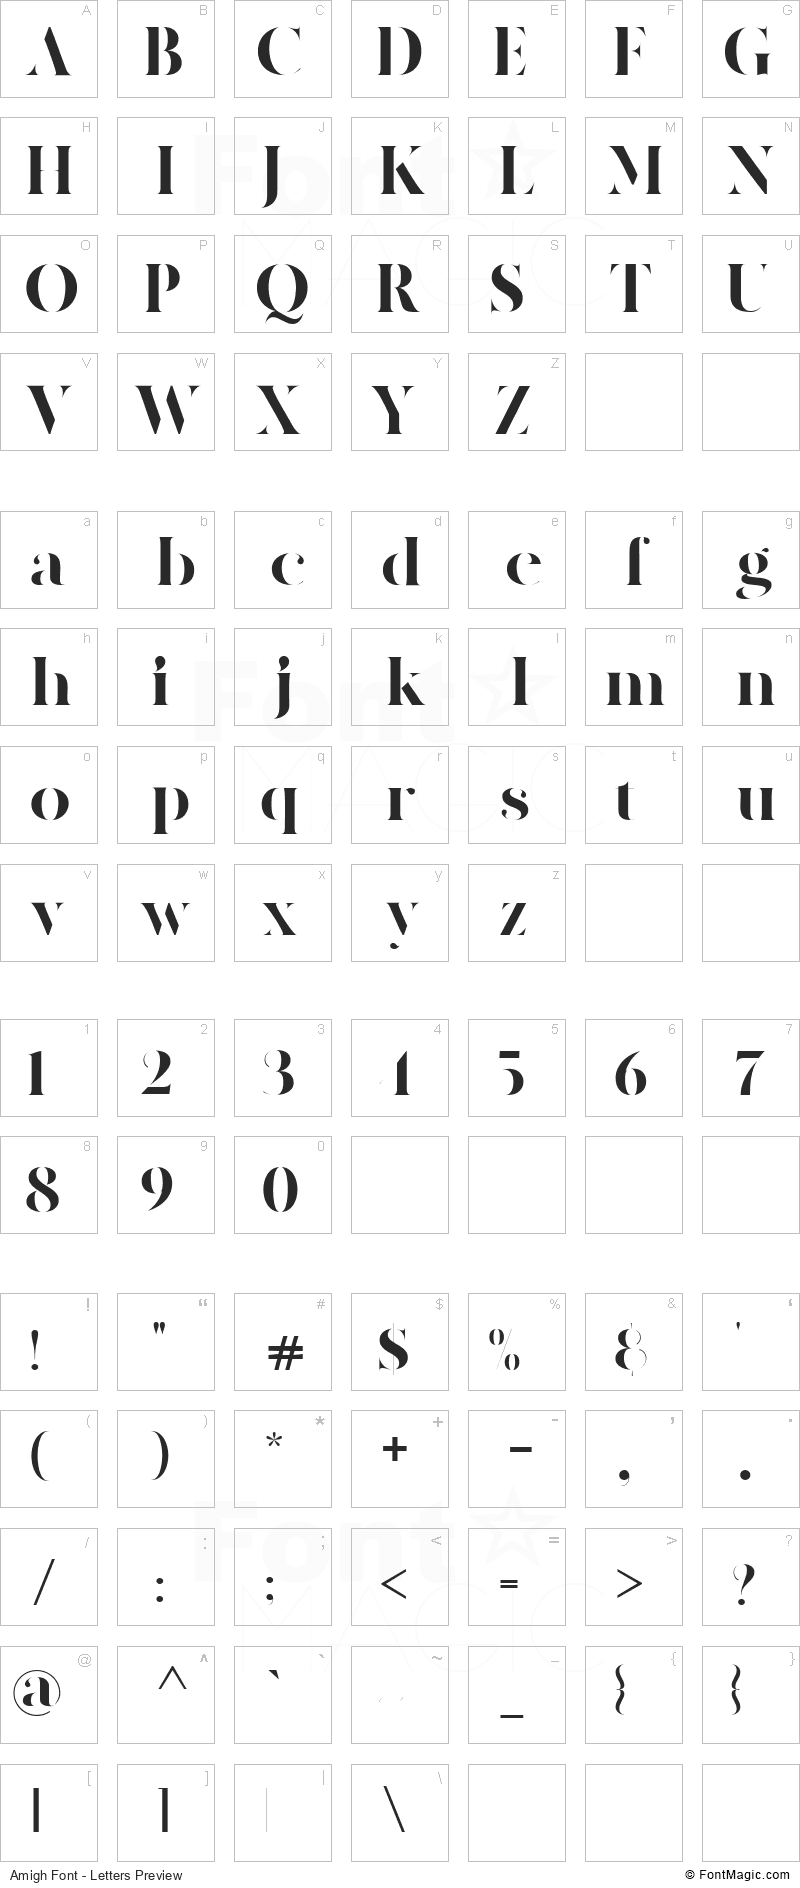 Amigh Font - All Latters Preview Chart